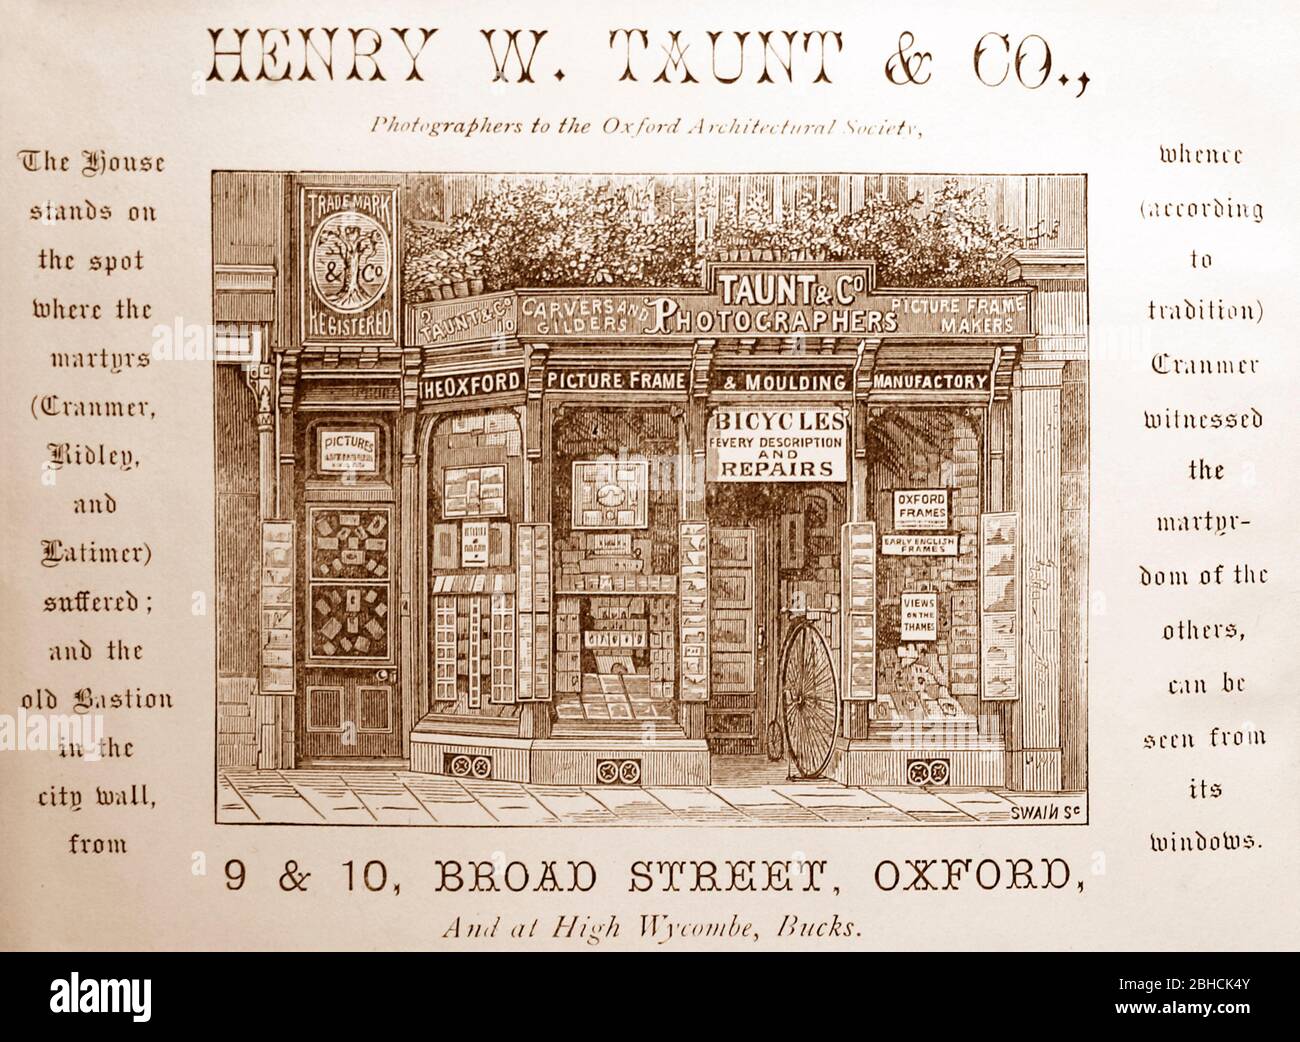 Advertisement for Henry W. Taunt's shop in Oxford, in 1875 Stock Photo